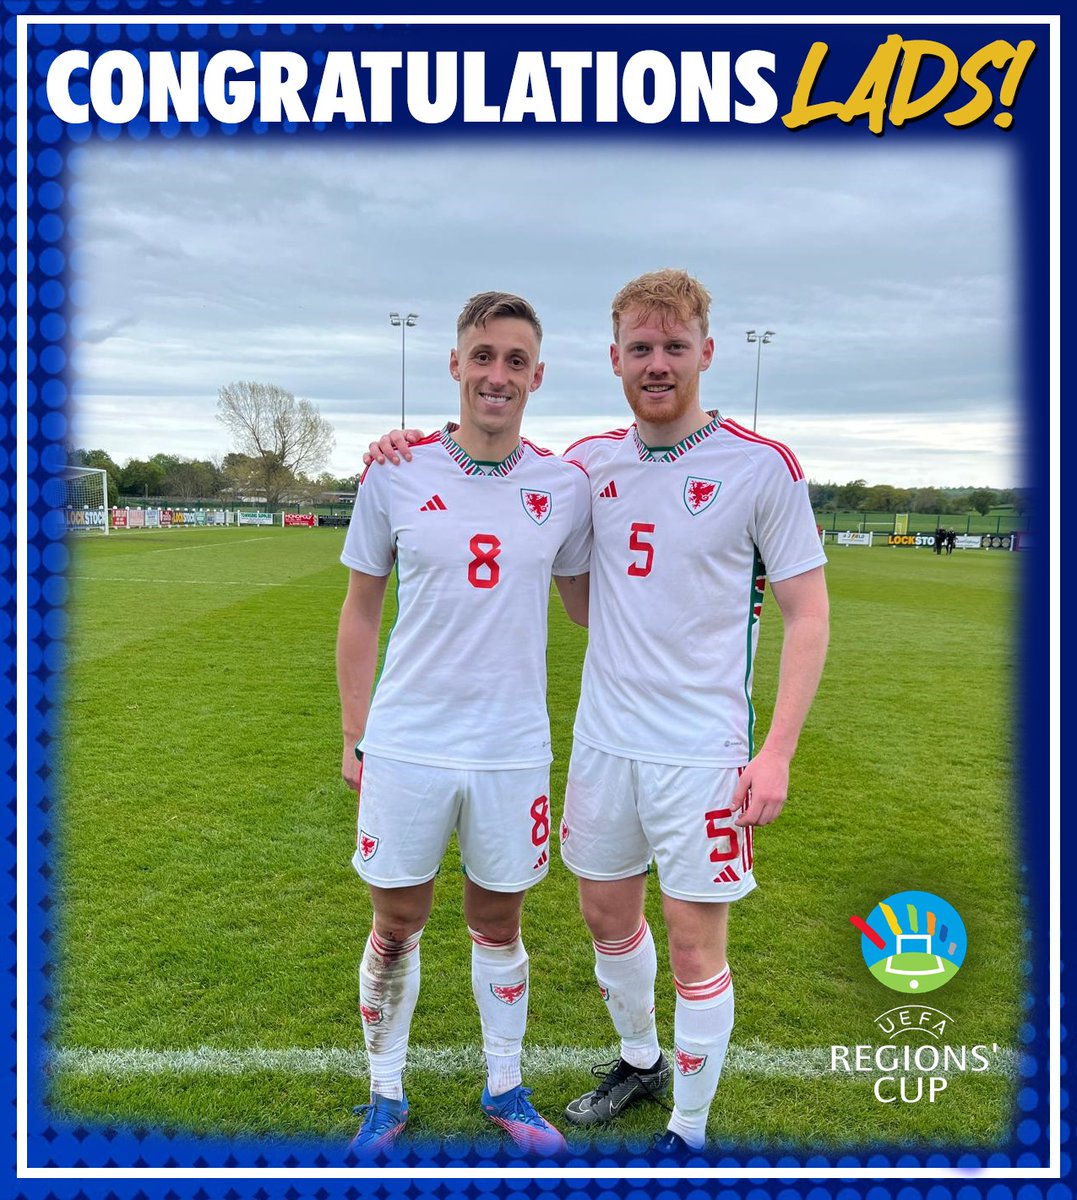 Two of our own . Congratulations @GeorgeMitten @cottam_harry on starting for the North wales squad in a 2-0 defeat against South Wales. 2nd leg to go so fingers crossed 🔵⚪️🔵